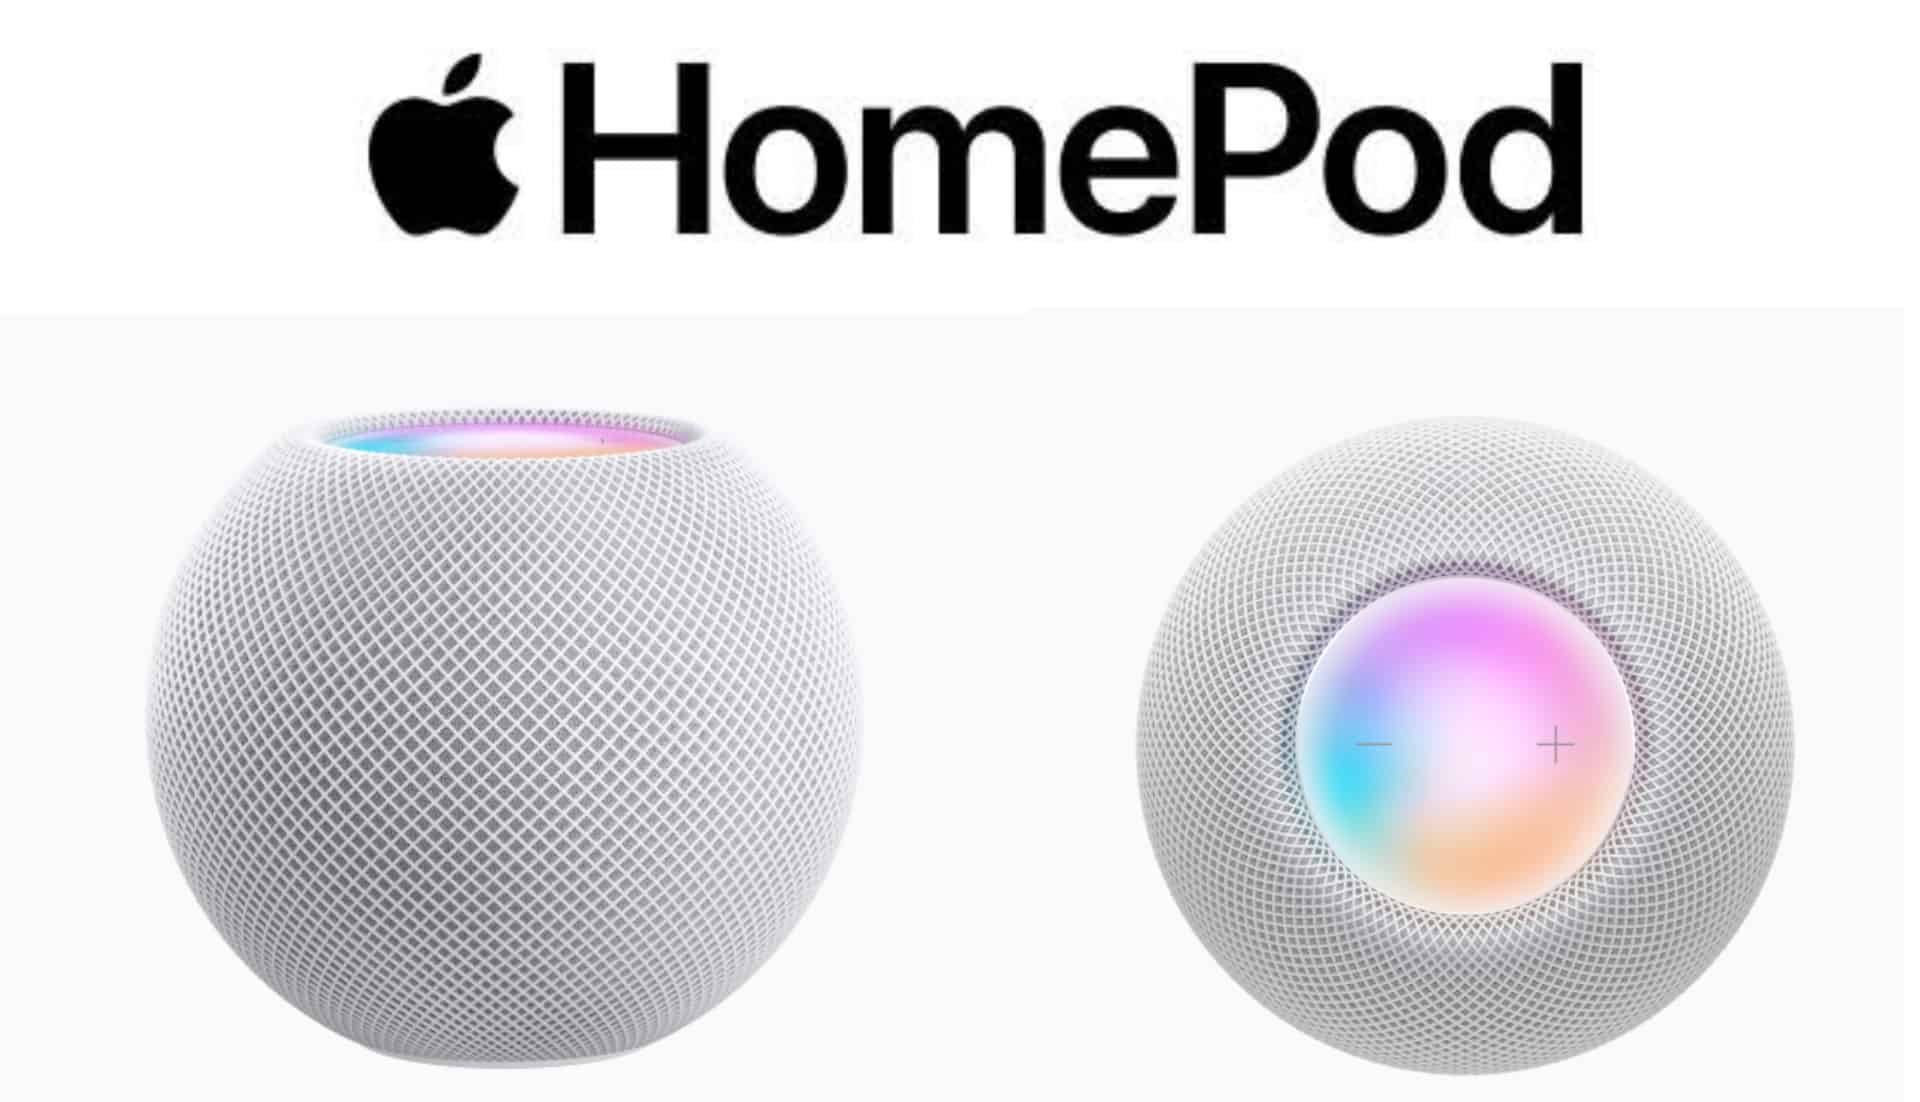 Apple Launches HomePod Mini Smart Speaker for ₹9,900 With New Siri Features